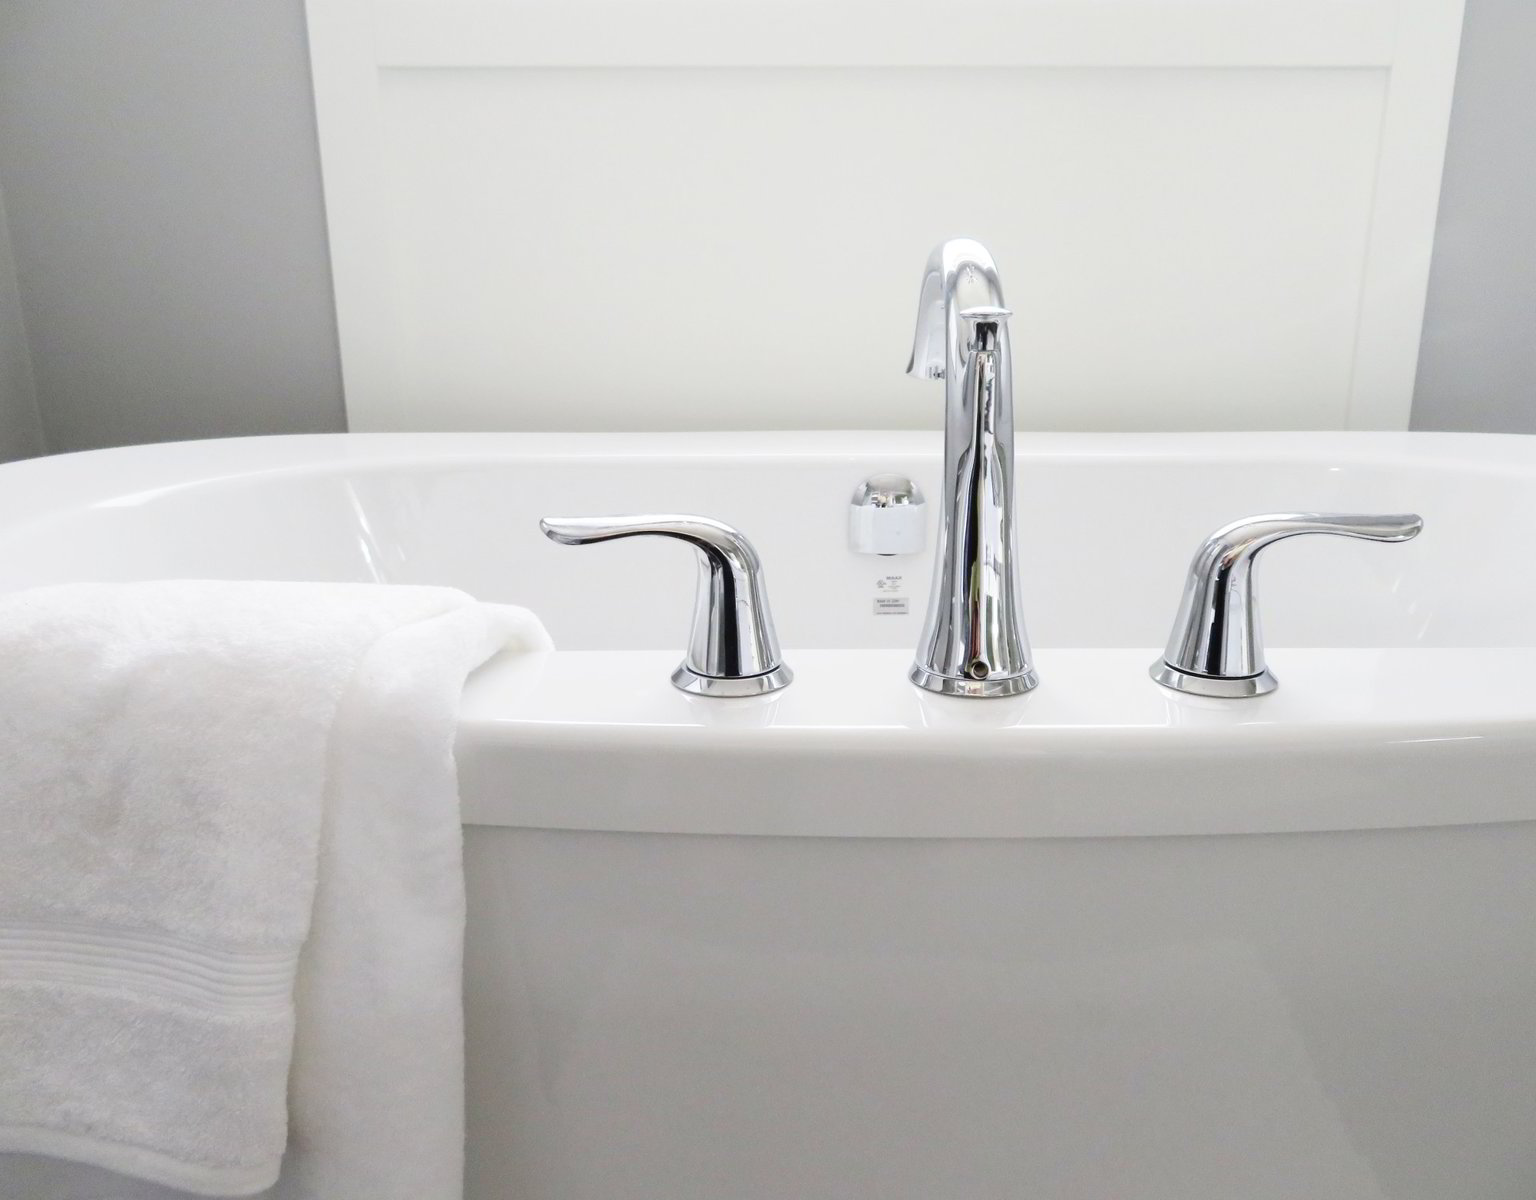 How To Fix A Leaky Bathtub Faucet A Step By Step Guide